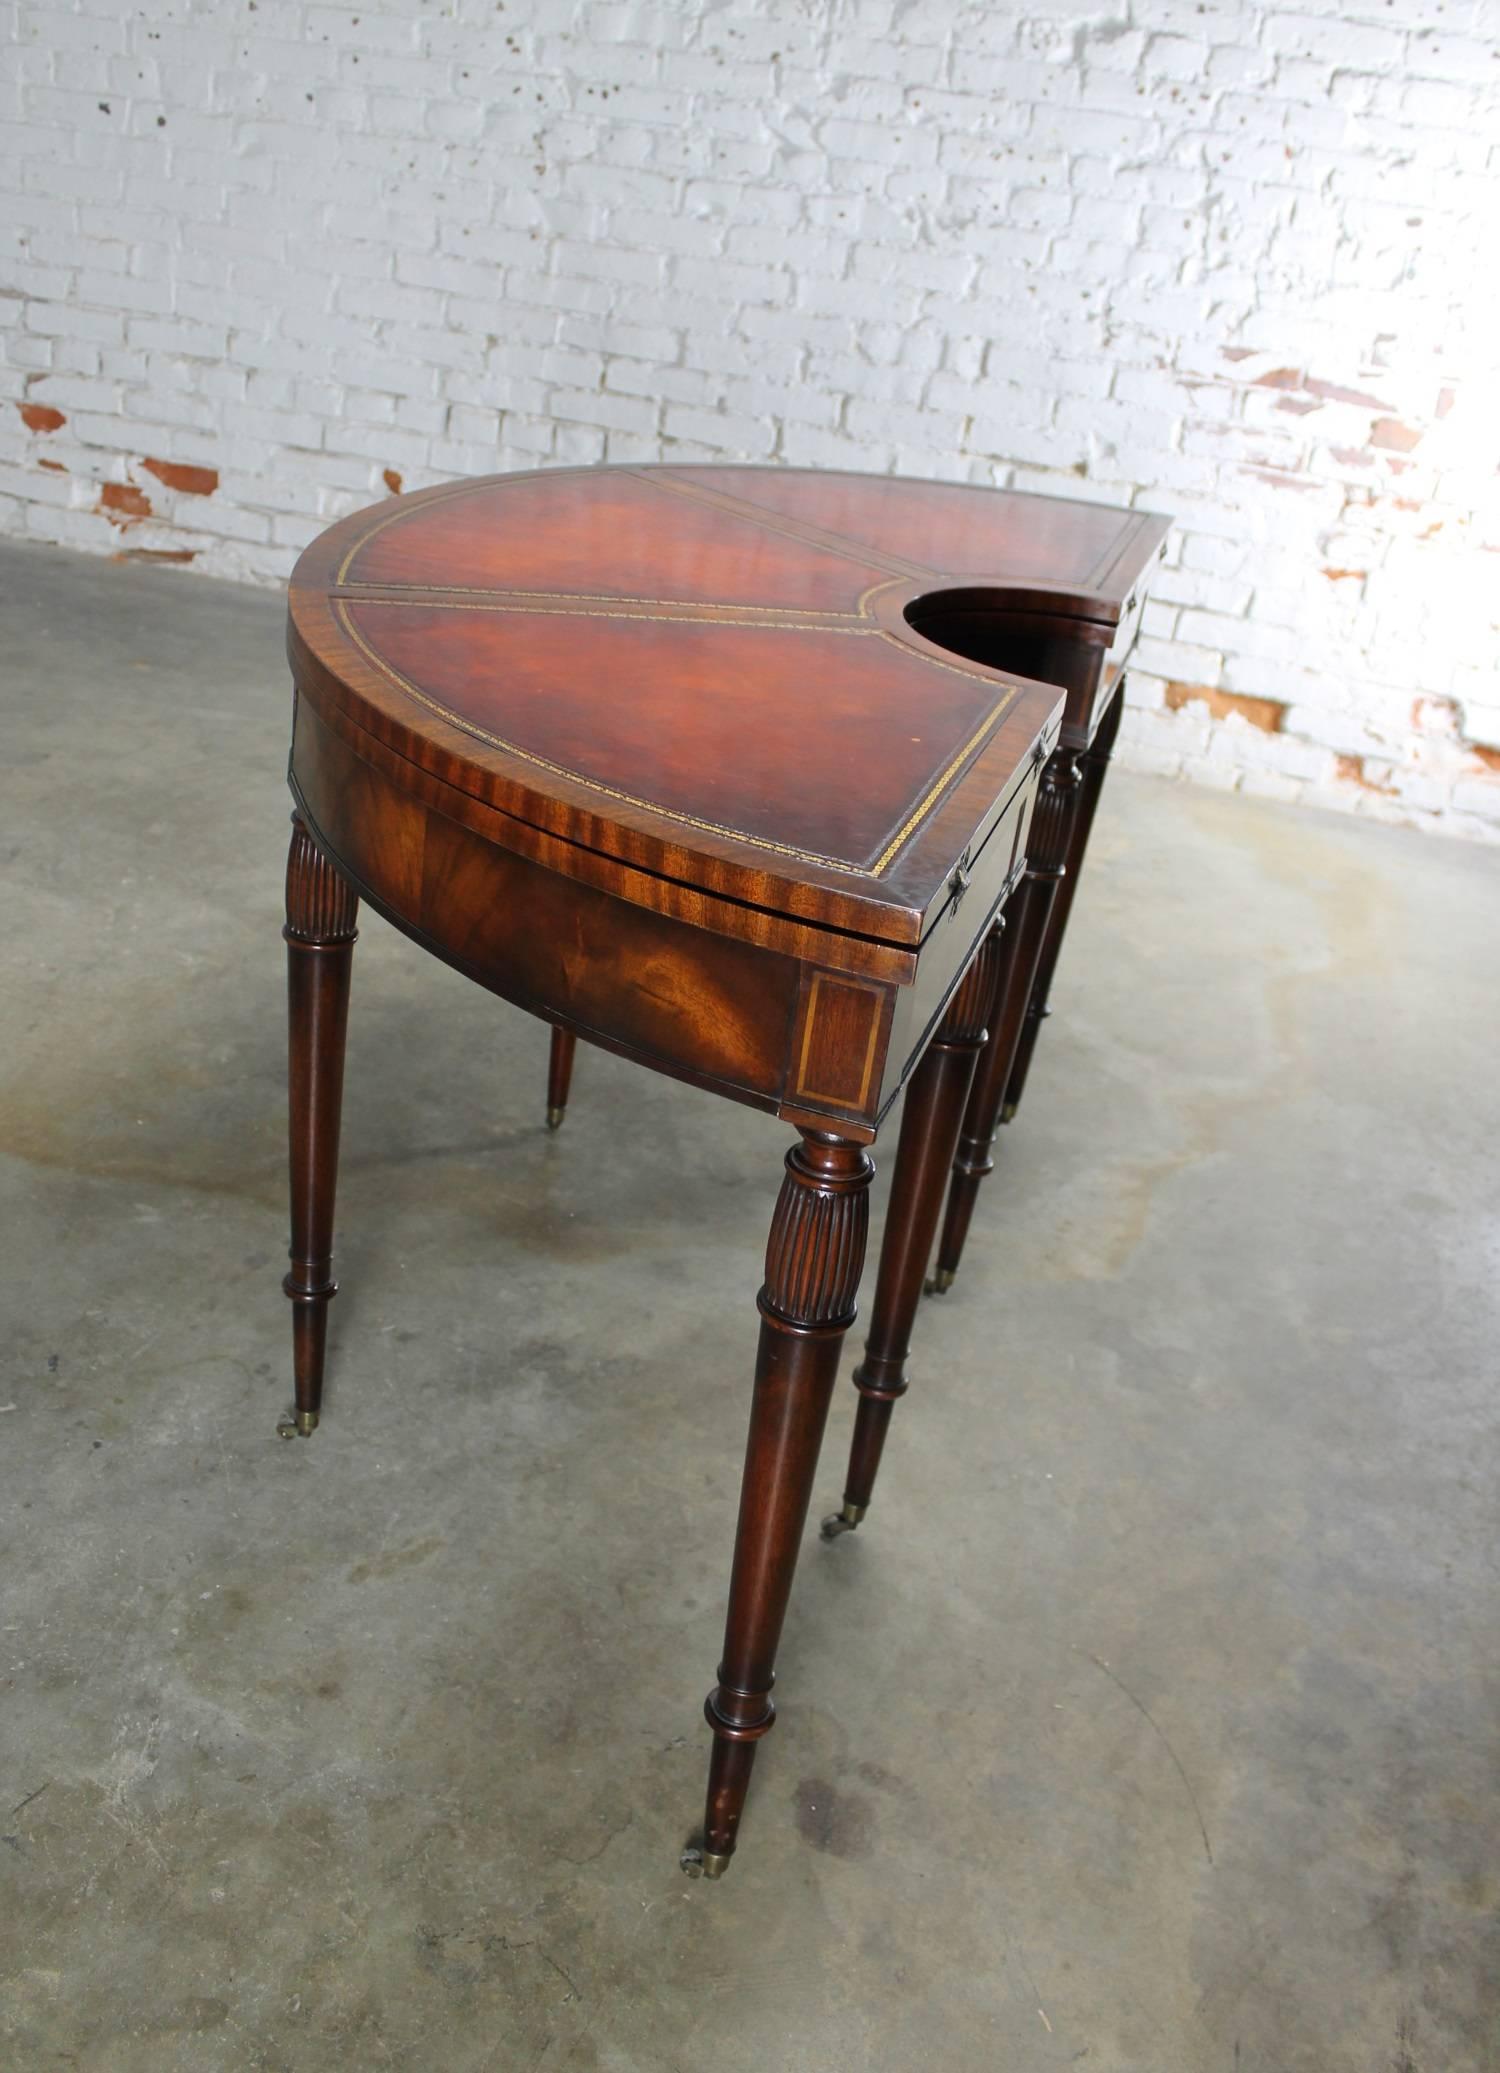 20th Century Federal Style Mahogany and Leather Flip Top Demilune or Game Table by Weiman